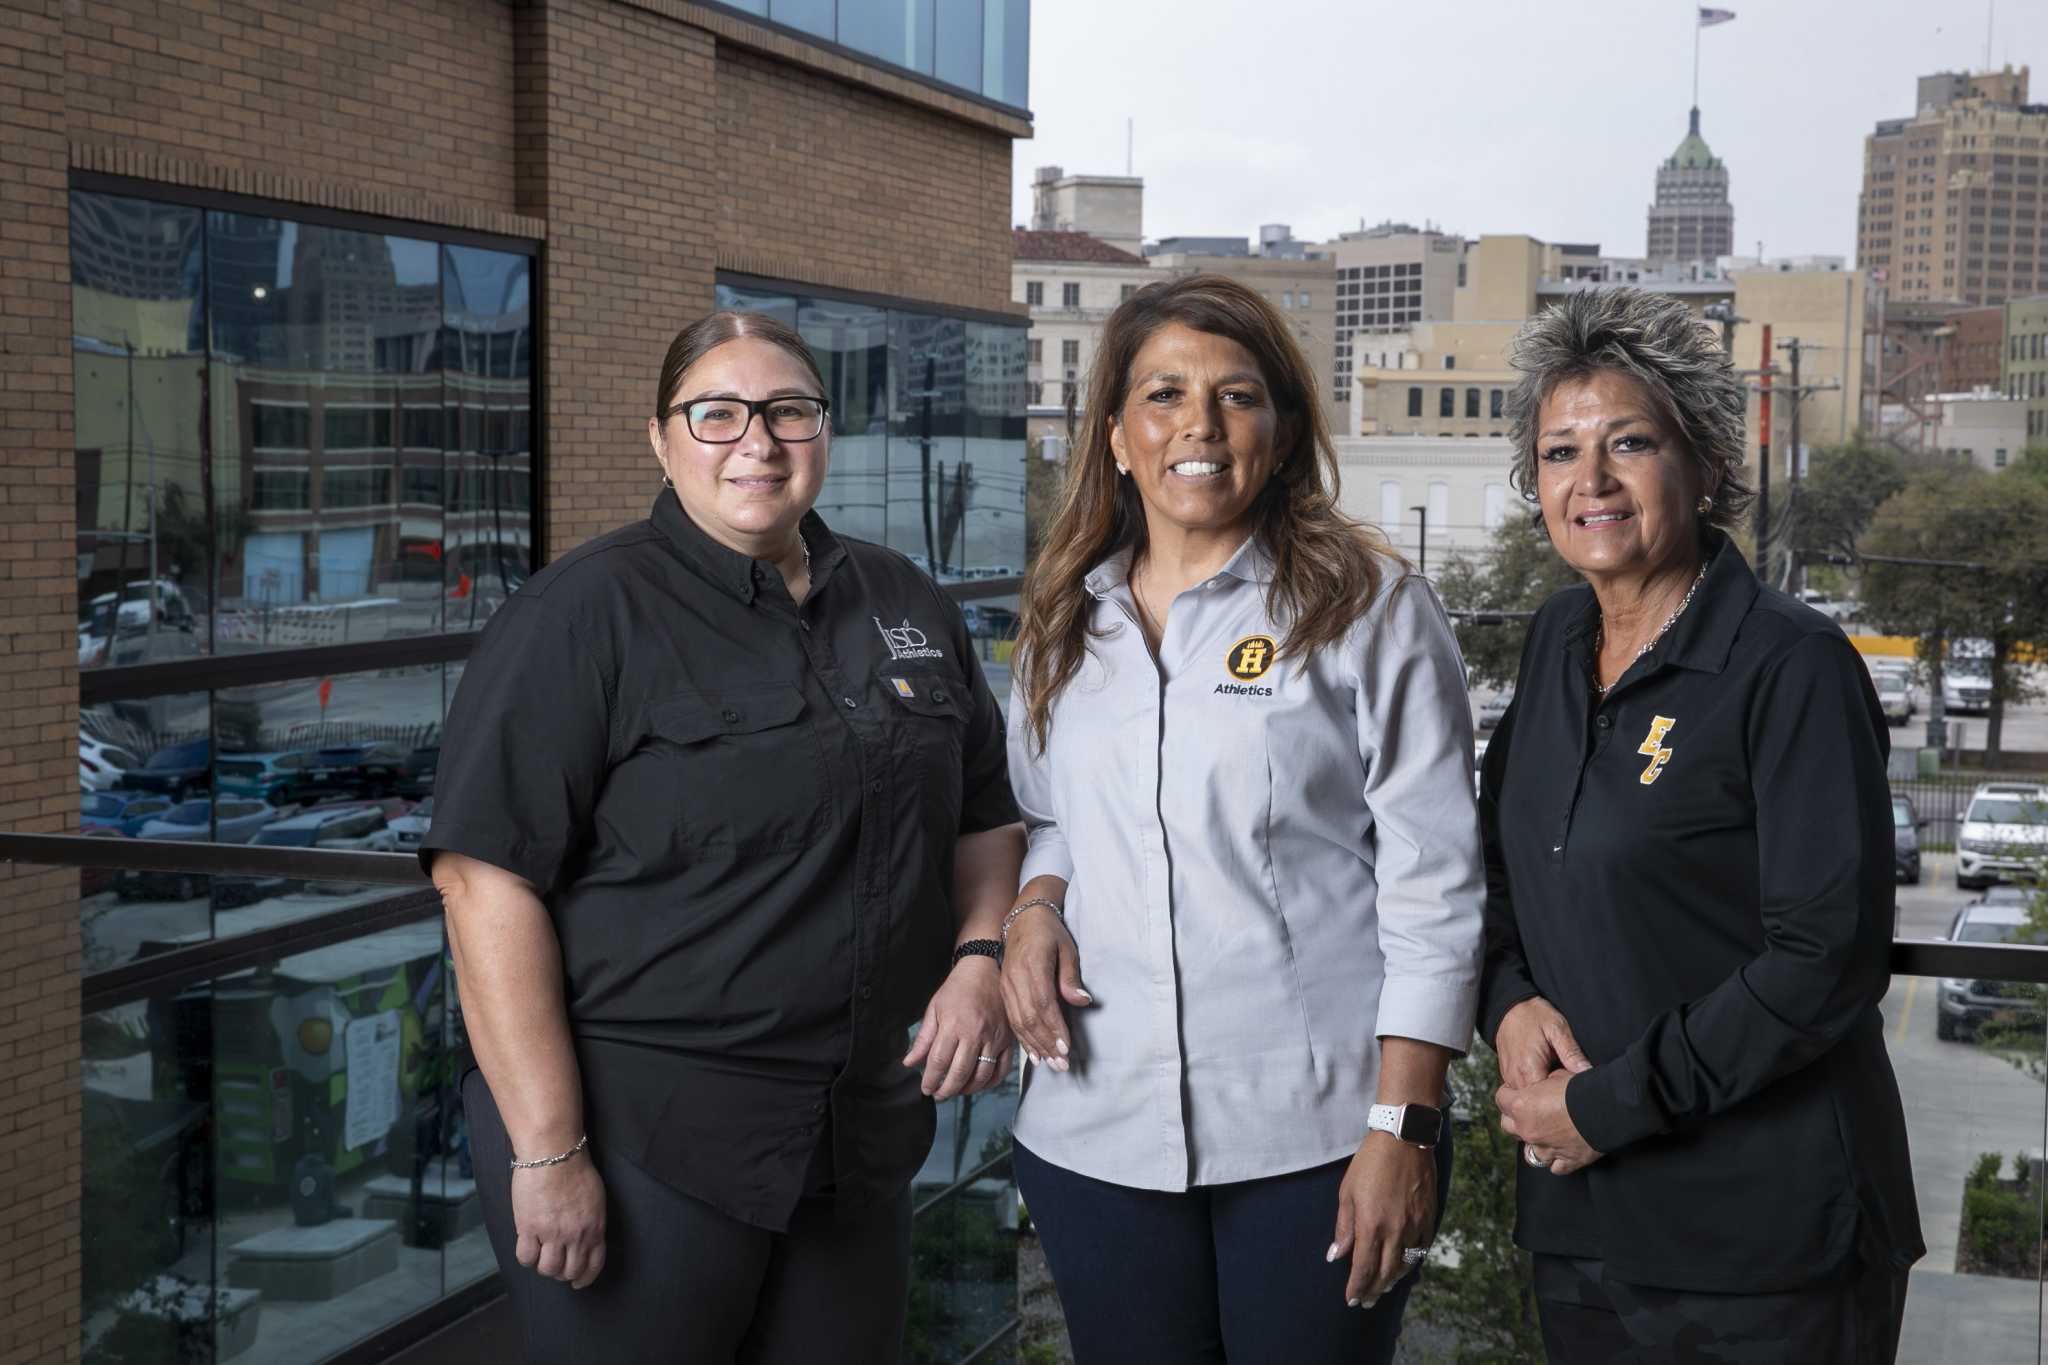   
																Beyond the Game: Area's women athletic directors aim to be role models for new generation 
															 